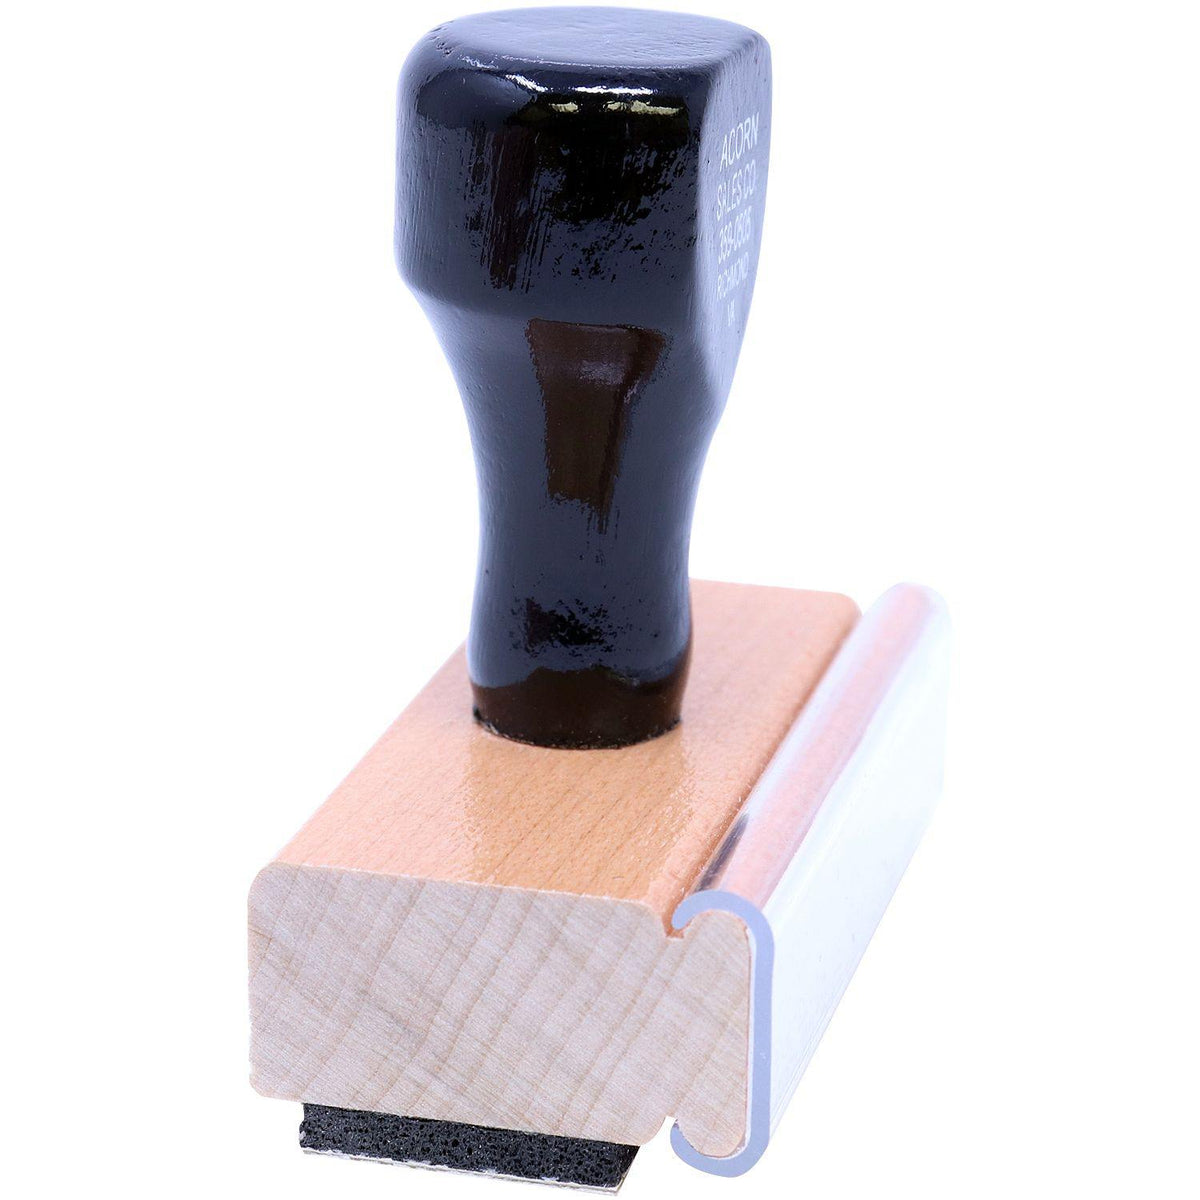 Side View of Large Ira Account Rubber Stamp at an Angle